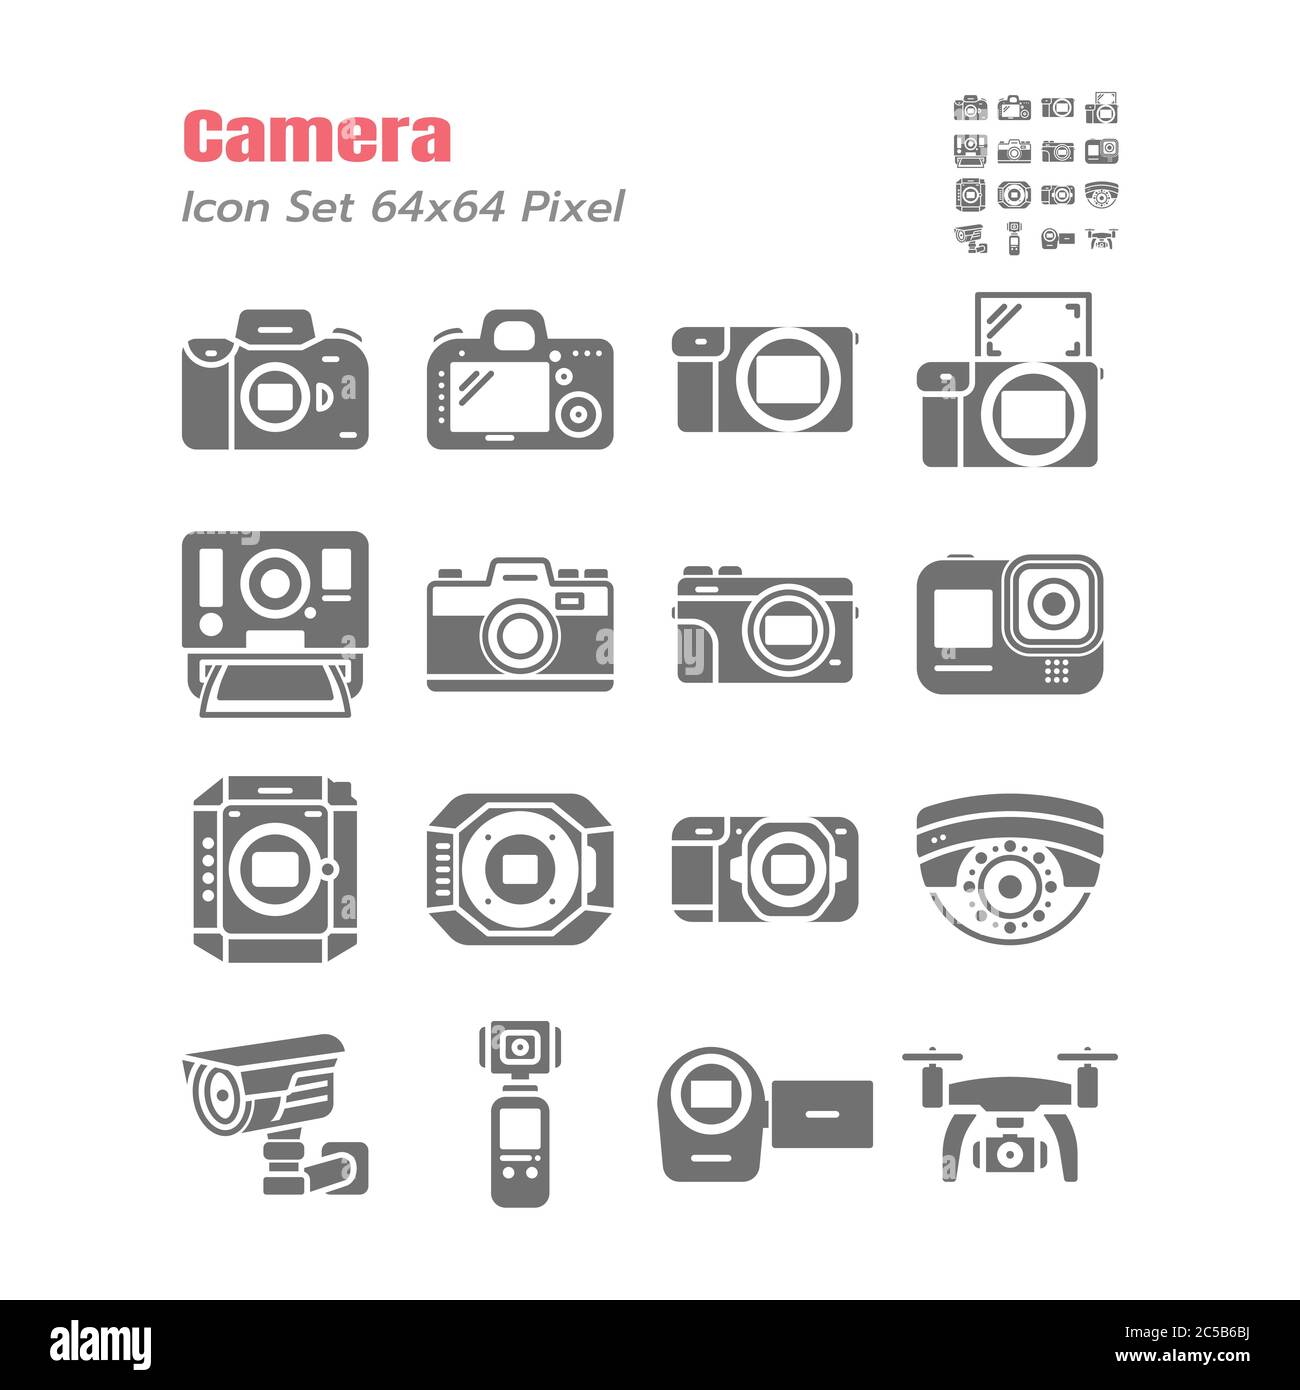 Simple Set of Camera Vector Solid Glyph Icons. such as DSLR, Mirrorless, Instant, Action Cam, Film, Compact, Drone, Photography, Cinematography, Digit Stock Vector